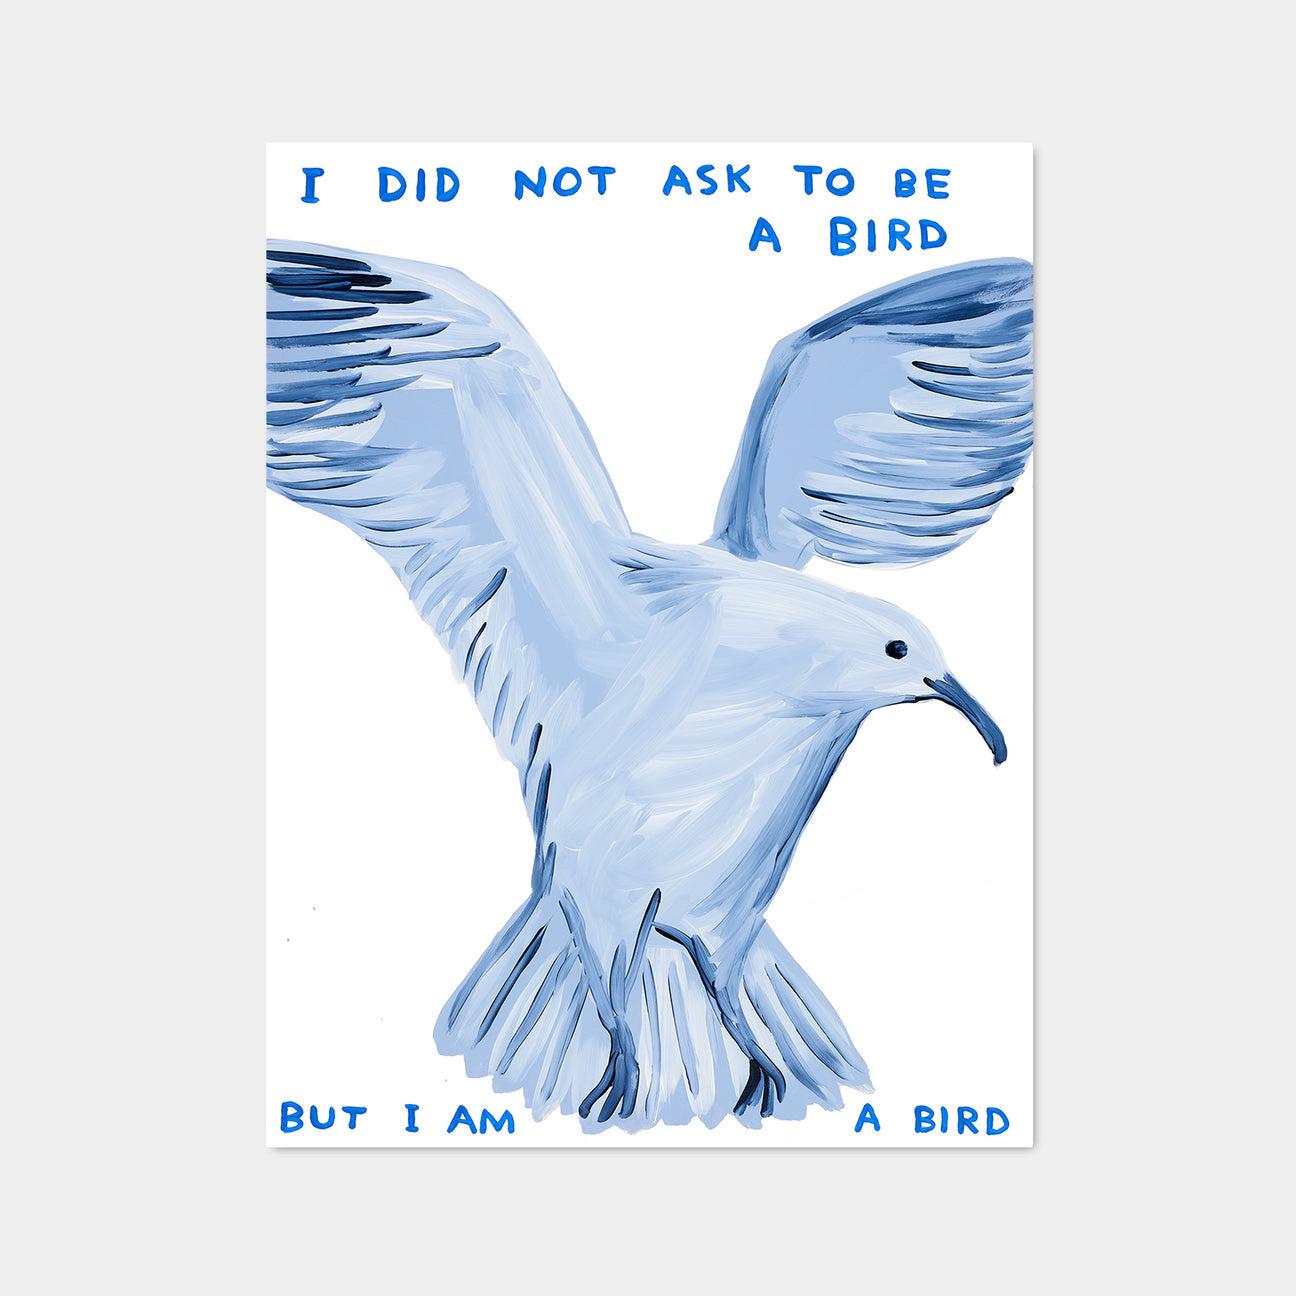 David Shrigley, I Did Not Ask To Be A Bird, 2021

Off-set lithograph
Open edition, unframed 
60 x 80 cm (23.62 x 31.5 inches) 
Printed on 200g Munken Lynx paper by Narayana Press in Denmark 

This print is based on the original acrylic on paperwork